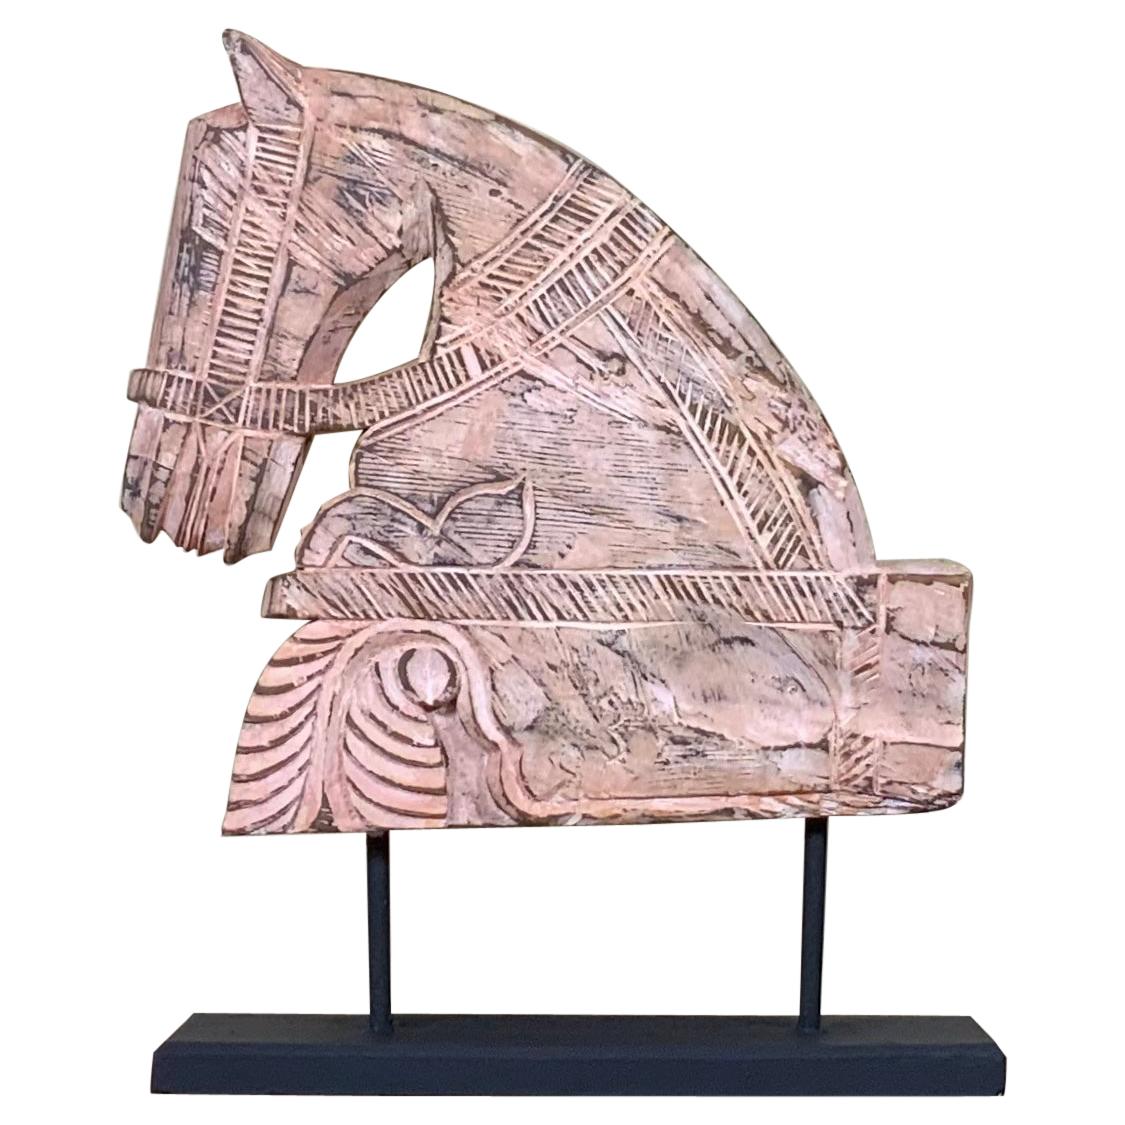 Architectural Hand Carved Wood Horse For Sale